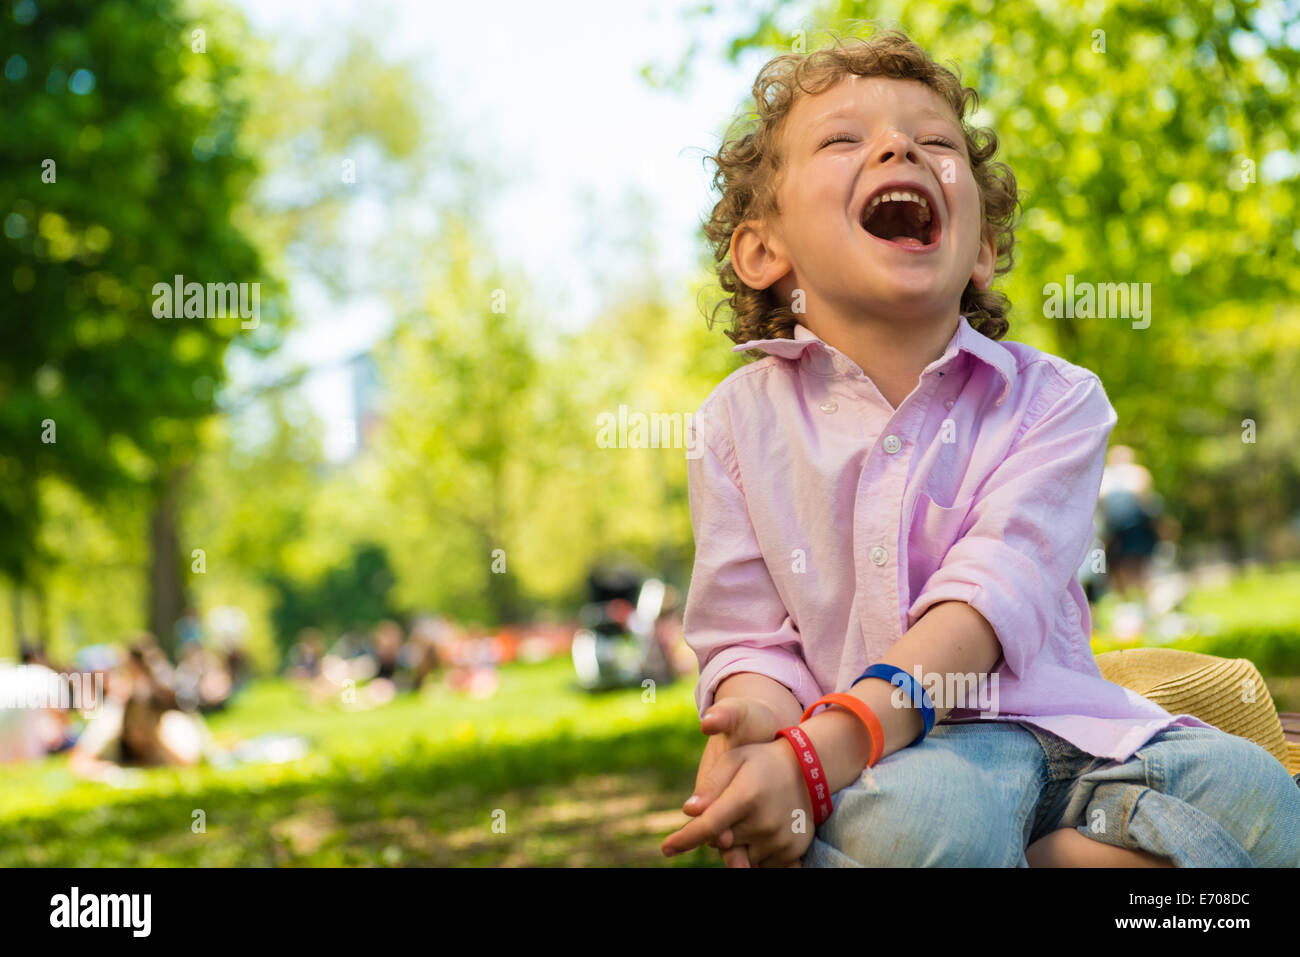 Boy laughing in park Banque D'Images